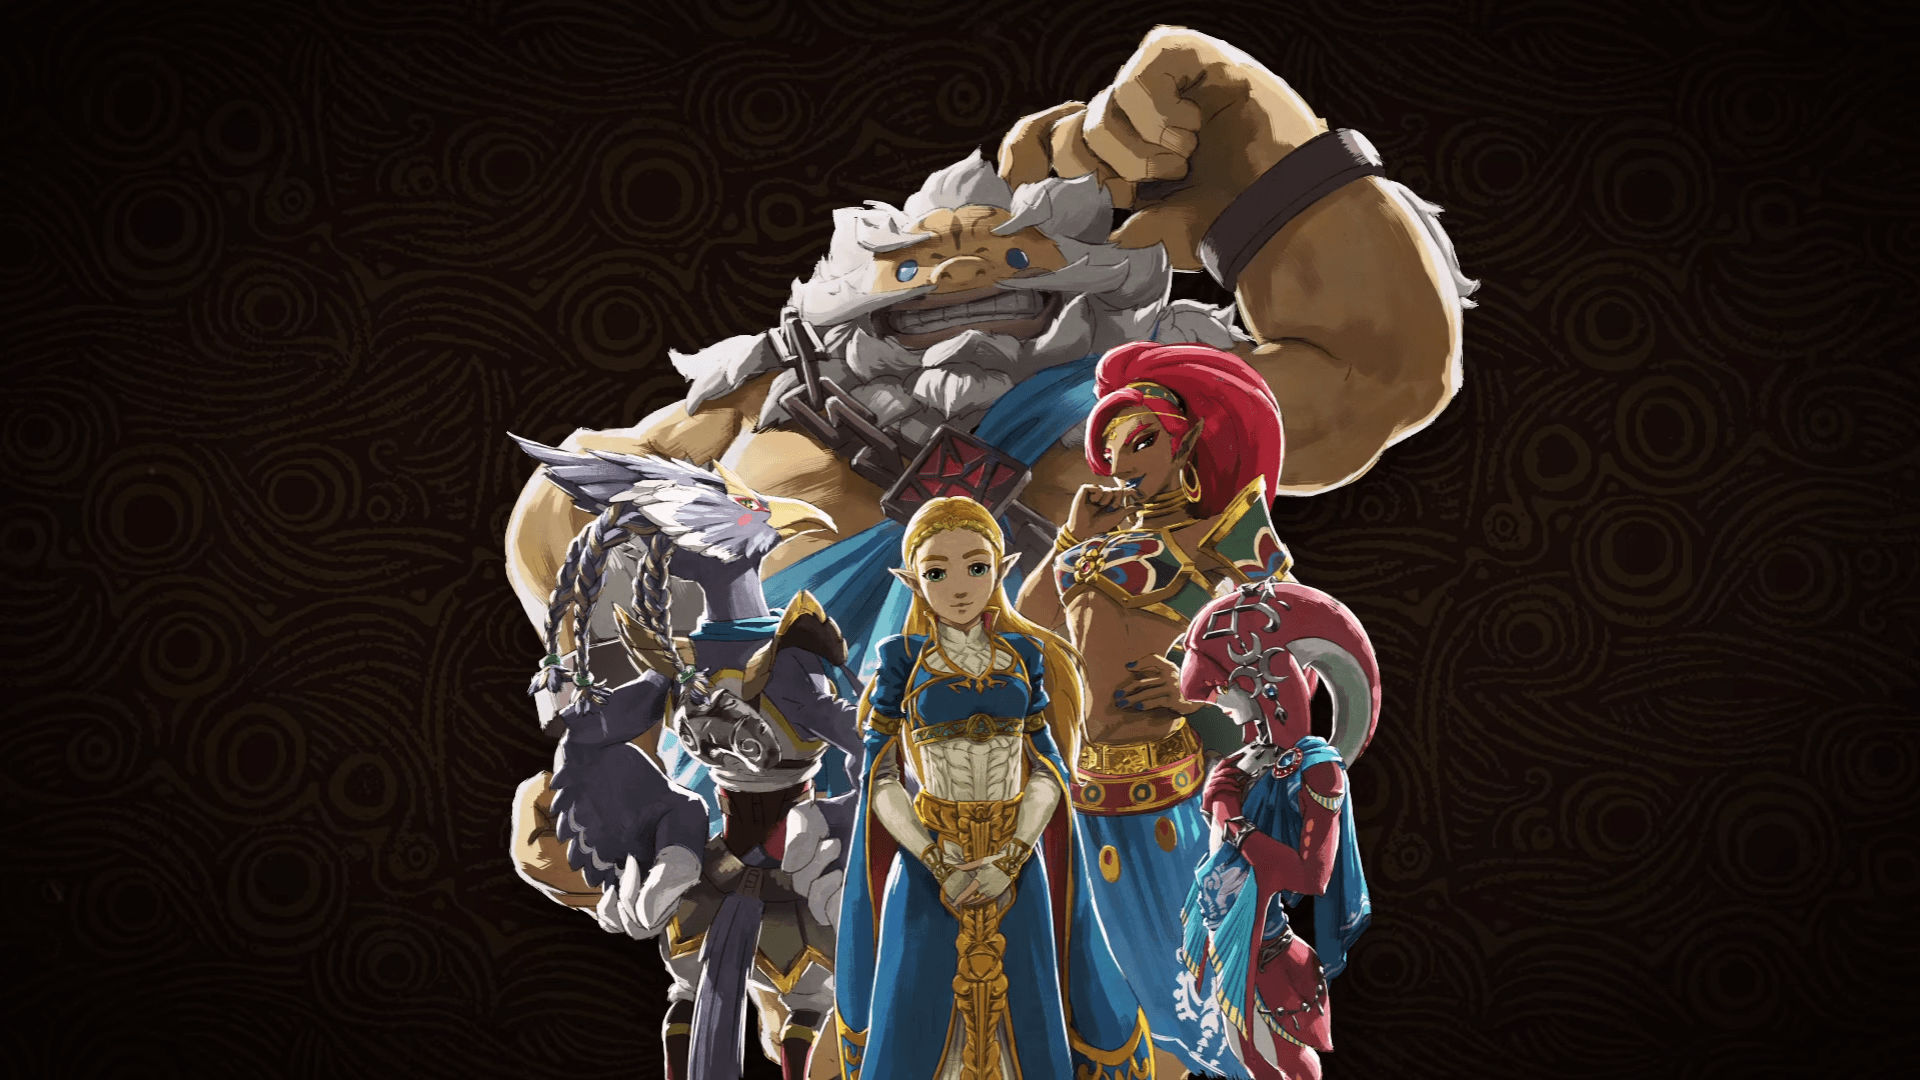 Wallpaper of the champions from the new trailer